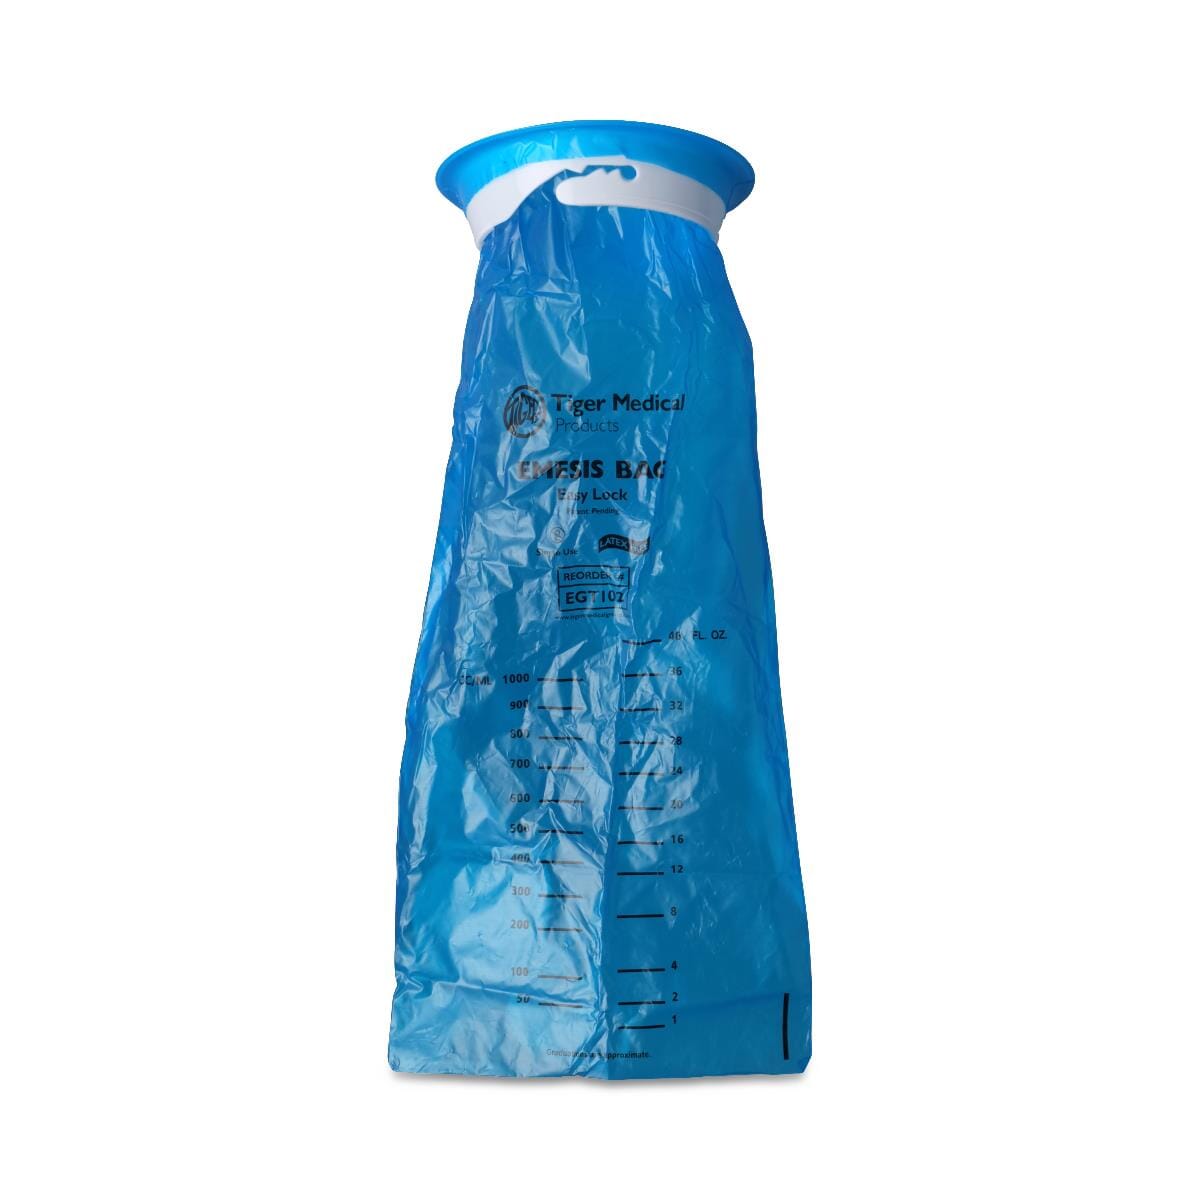 PARAMAN THE SUPERNATURAL HDPE EMPTY BAG (COLOR), BORA, BORI for PACKING of  FOOD,VEGATABLE,GRAINS,WHEAT, RICE, SUGAR etc PRODUCTS (45 X 27 inches)-6  Pieces, Plastic : Amazon.in: Home & Kitchen